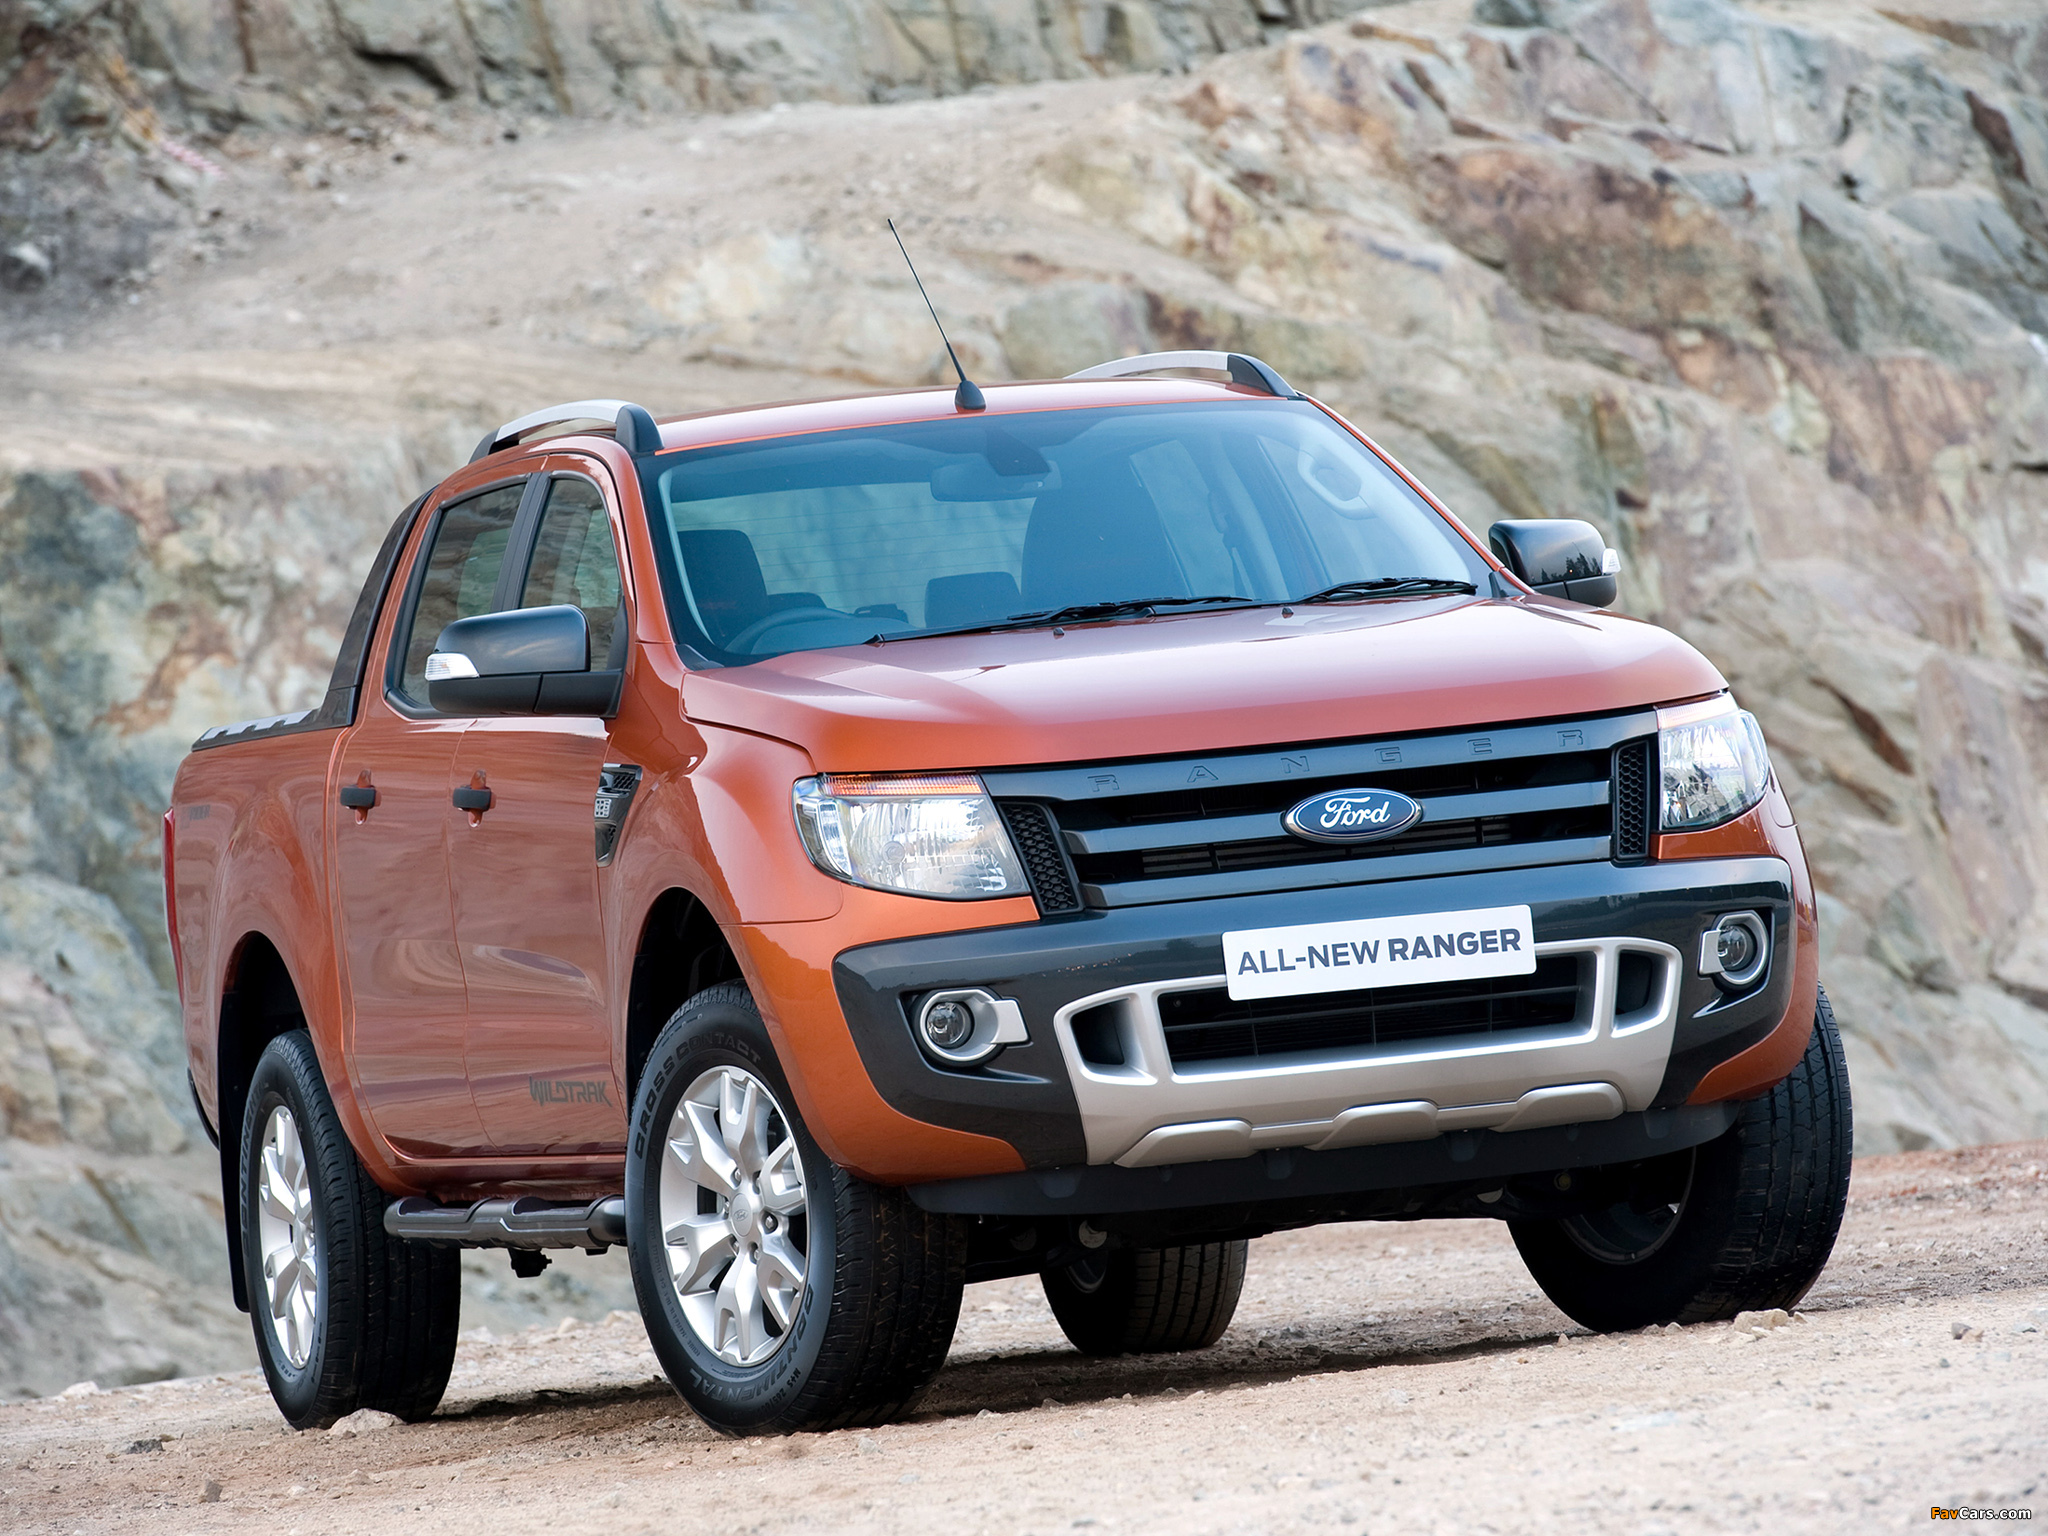 Ford wildtrak. Ford Ranger 2011. Форд рейнджер 2012. Ford Ranger Wildtrak. Форд рейнджер 2011 года.